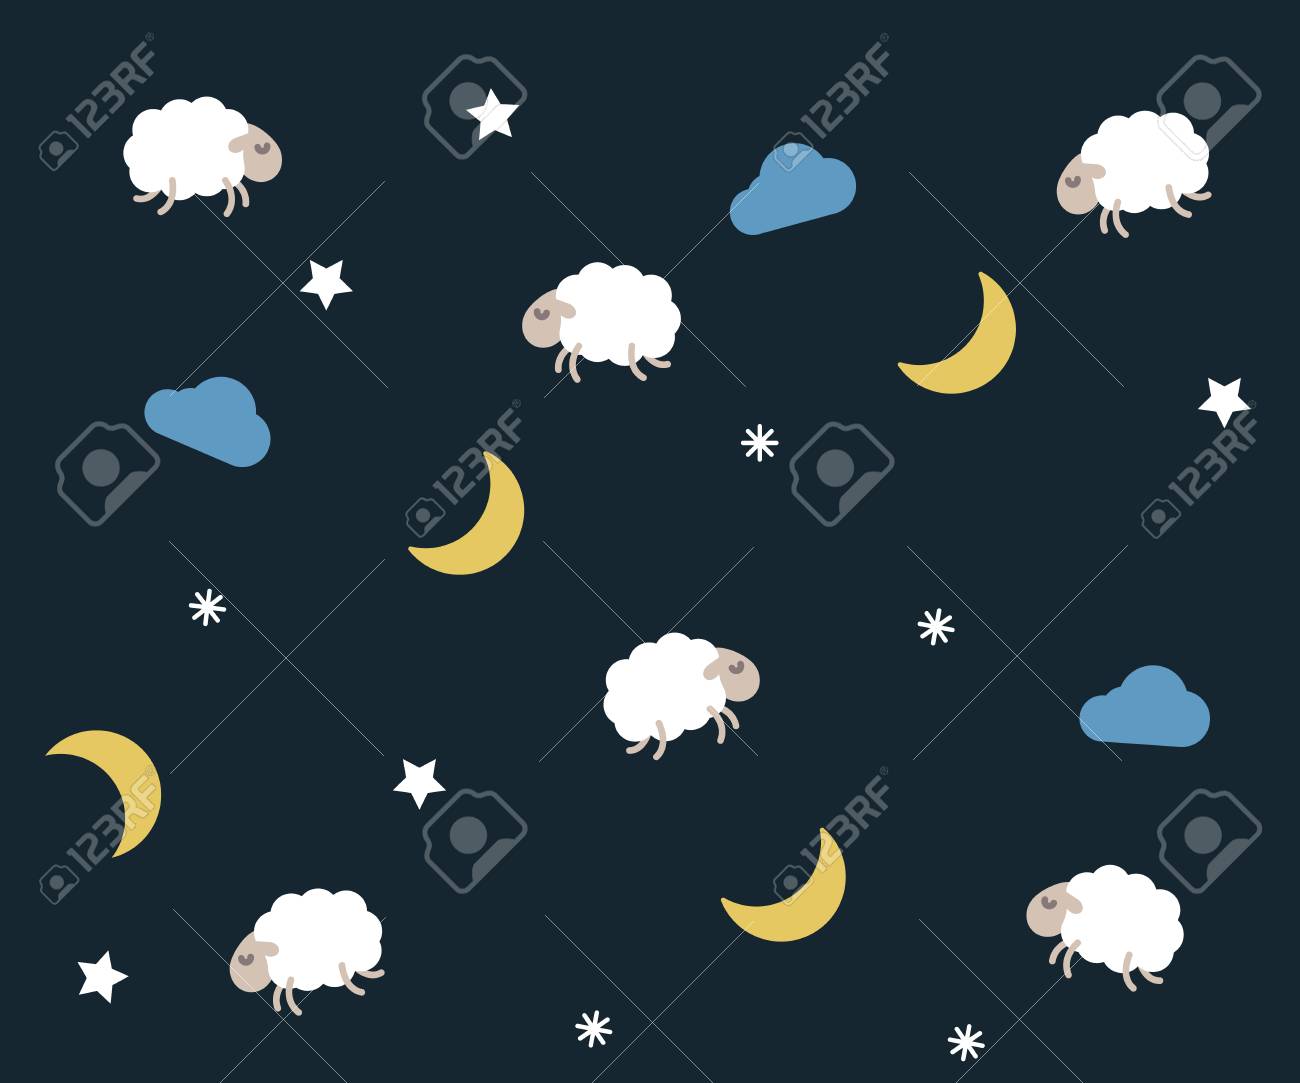 Cute Night Seamless Pattern Background For Kids Bedtime Sleeping